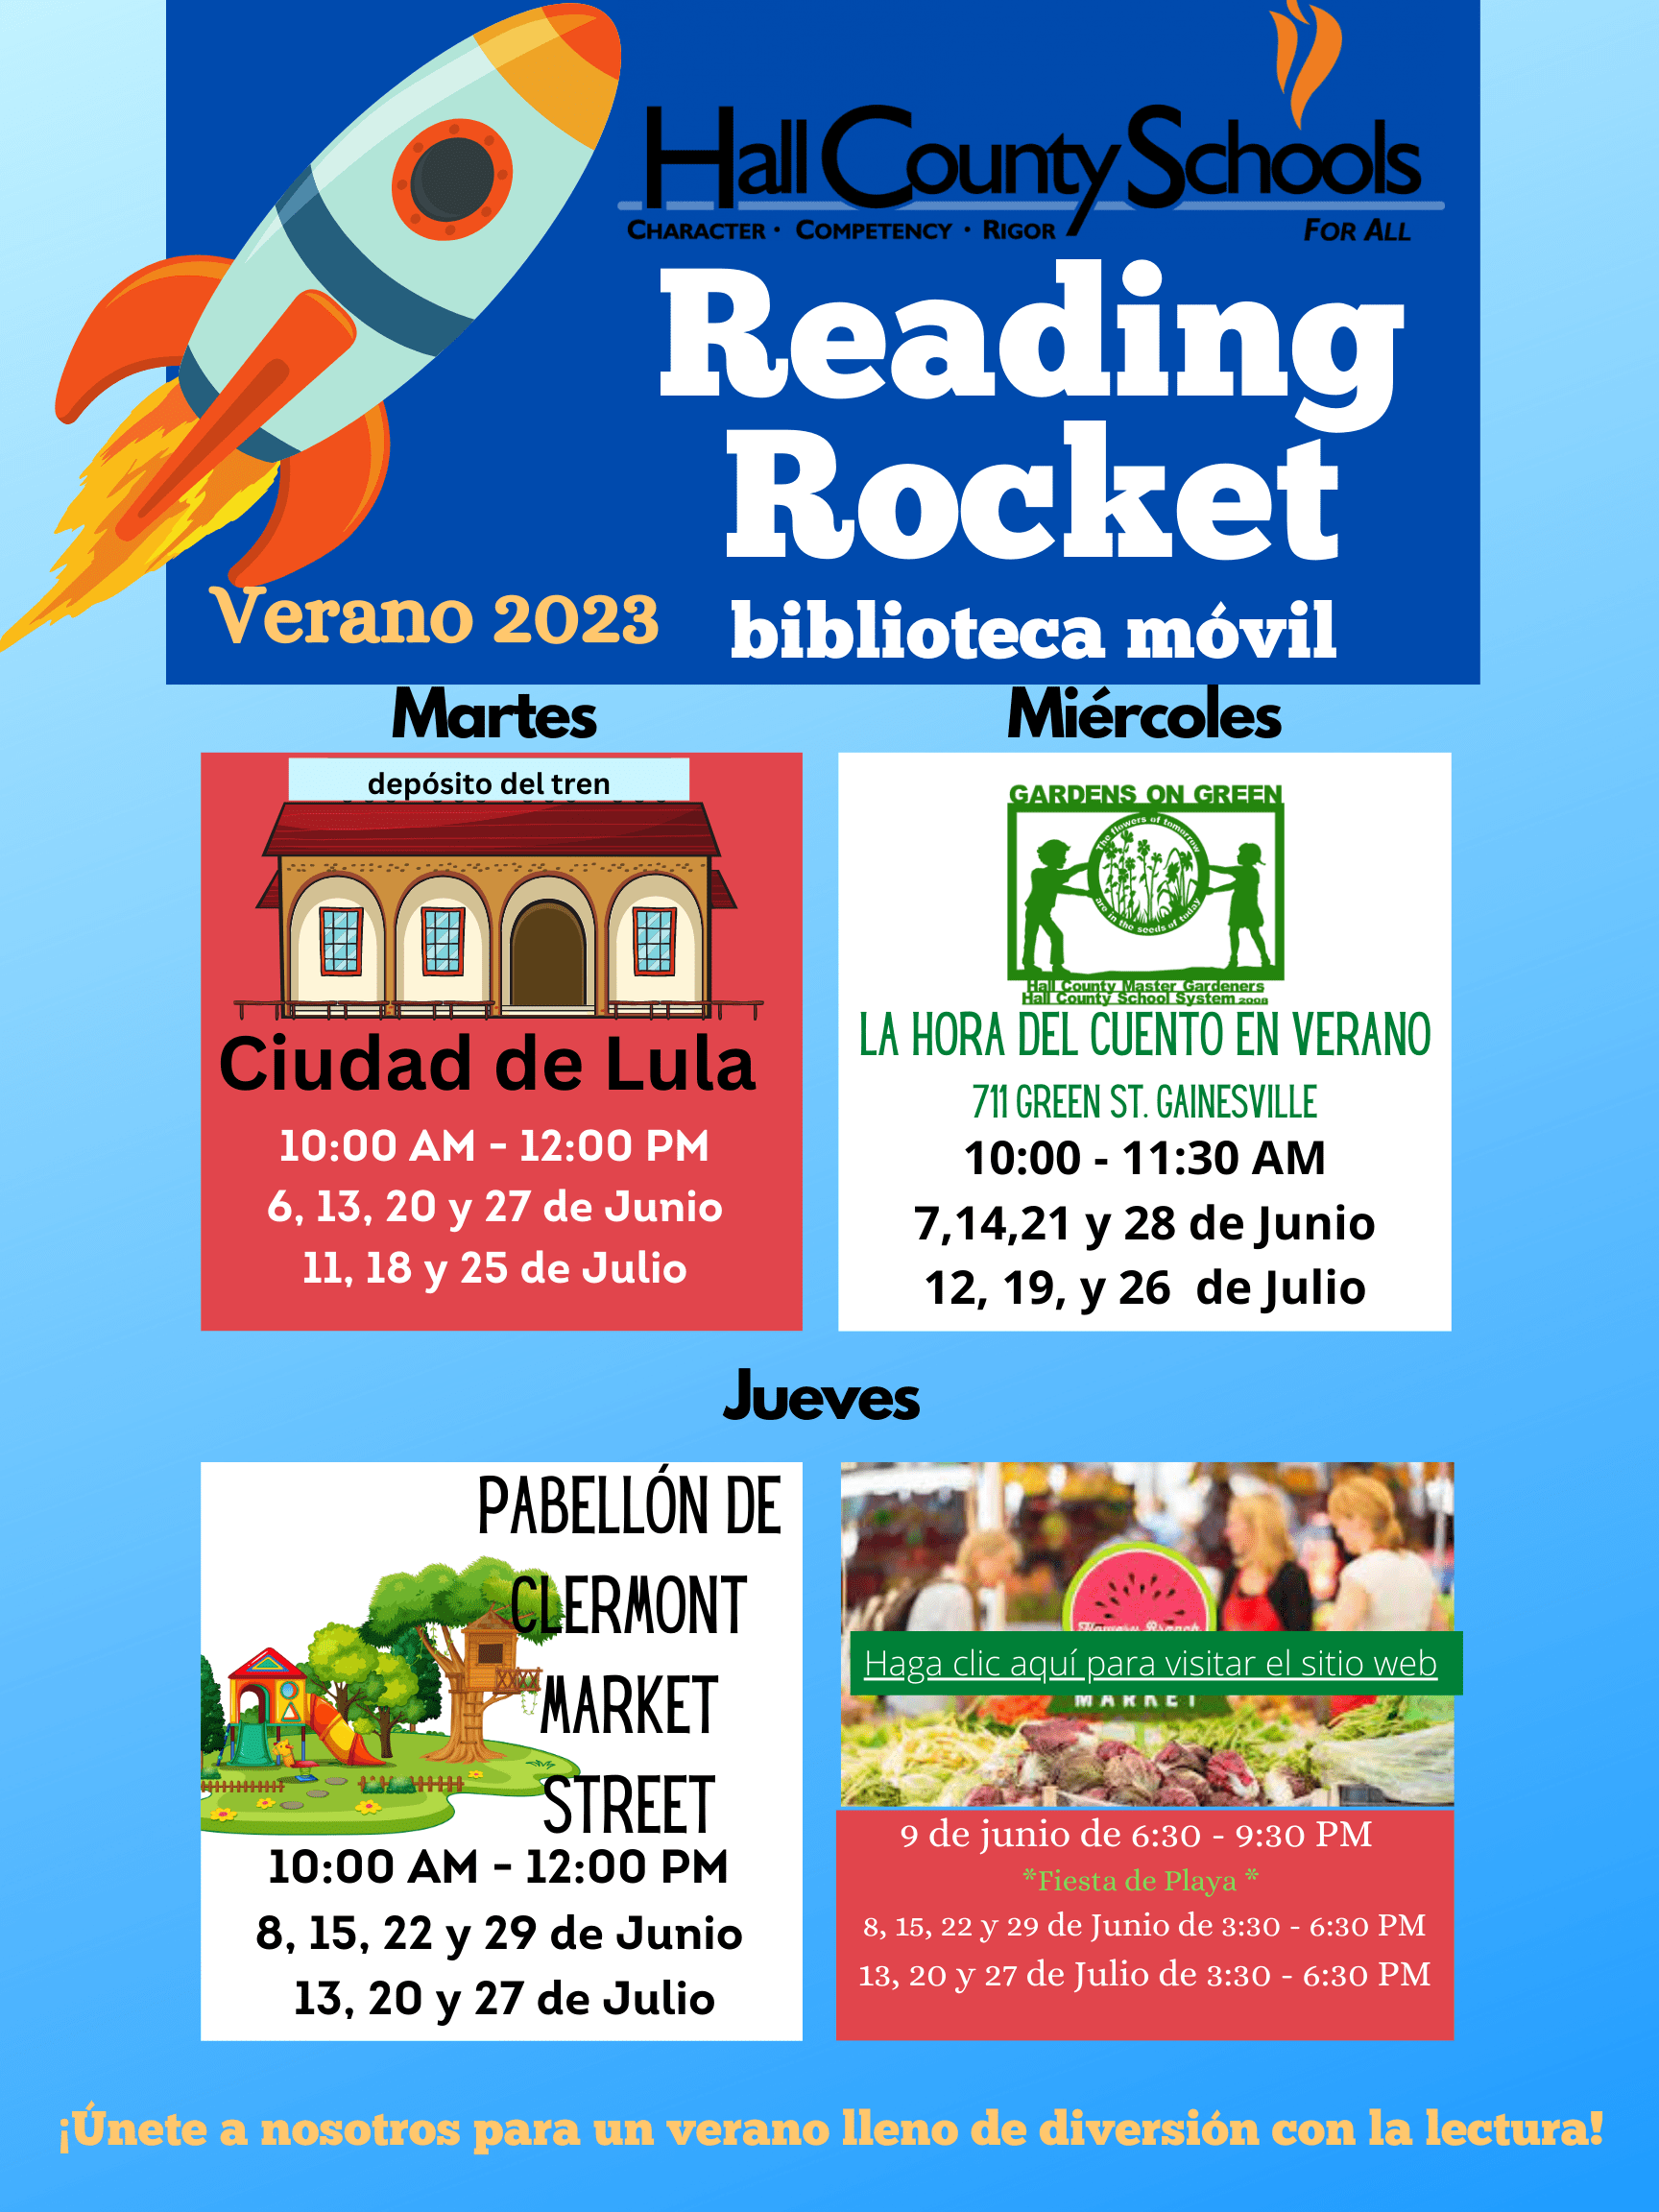 Spanish Reading Rocket locations, dates, and times